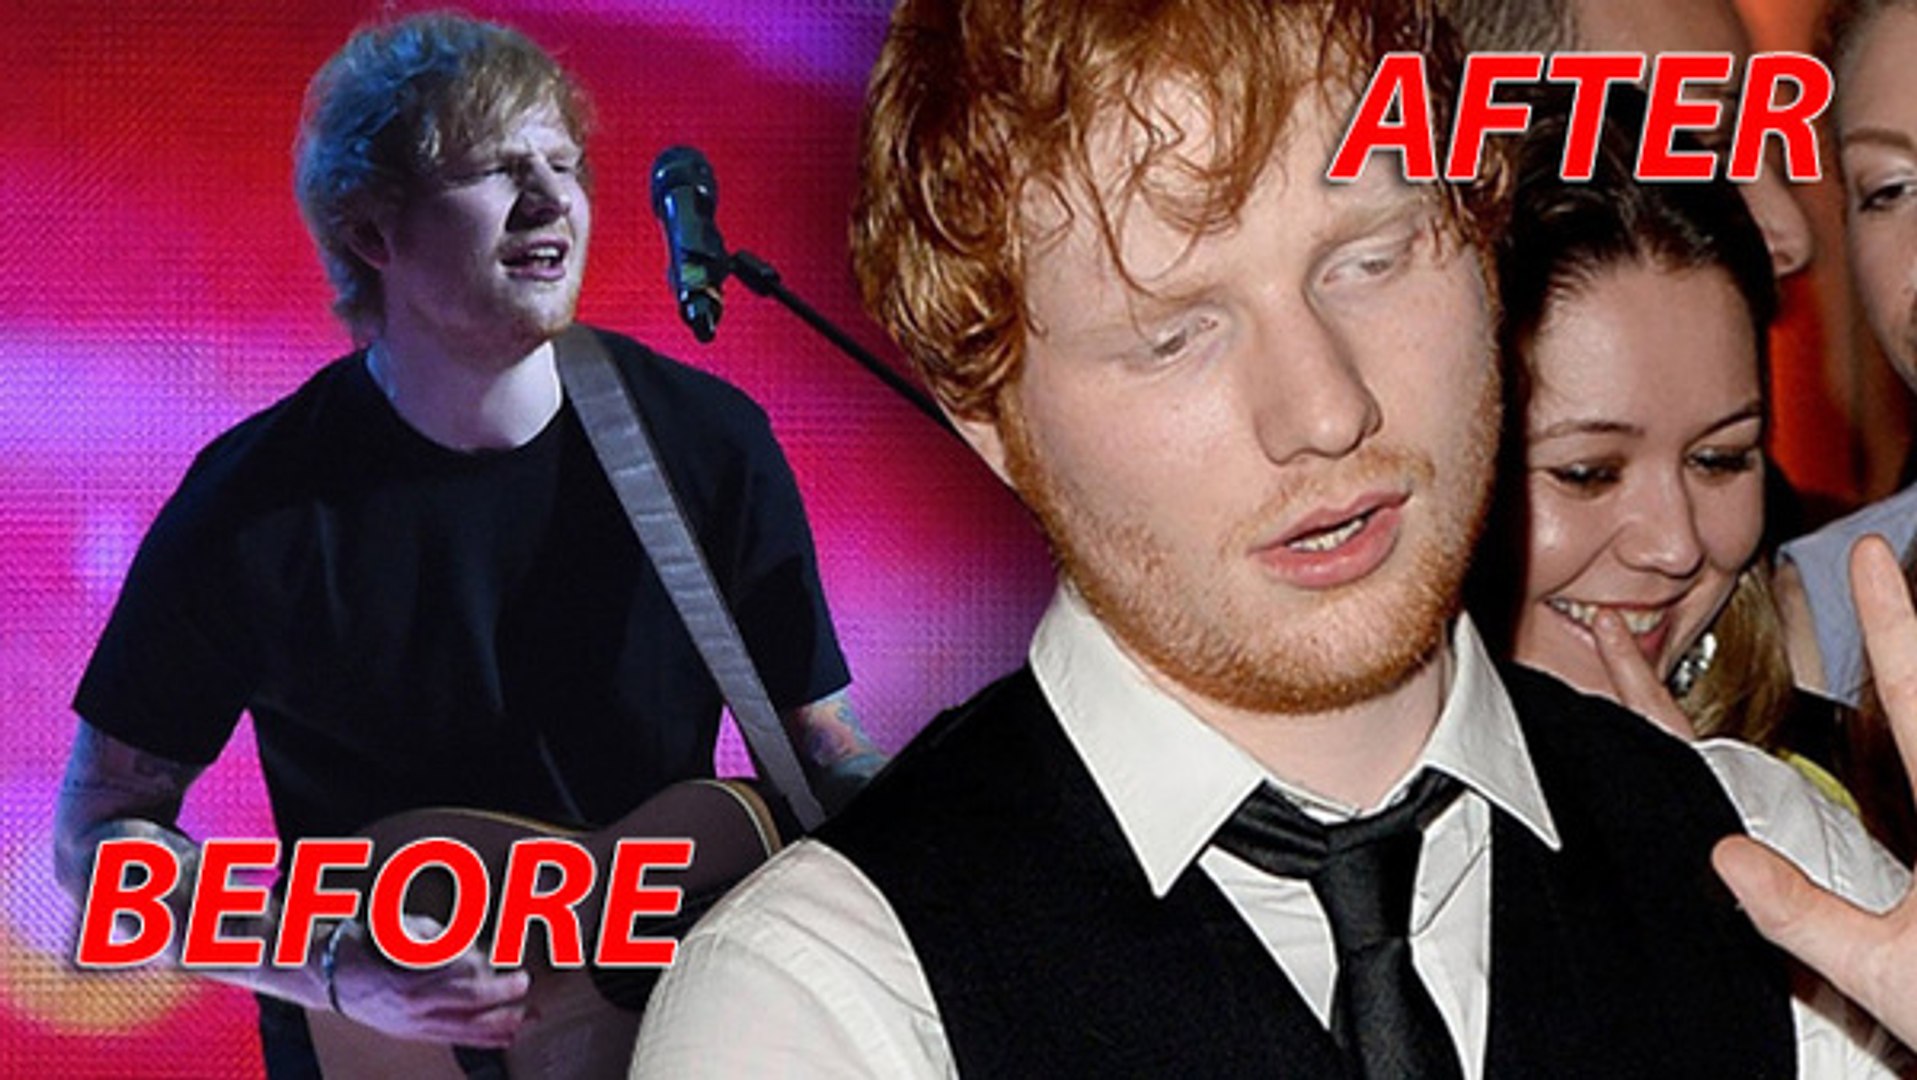 Ed Sheeran -- Album of the Year Leads to Night of His Life (PHOTOS)